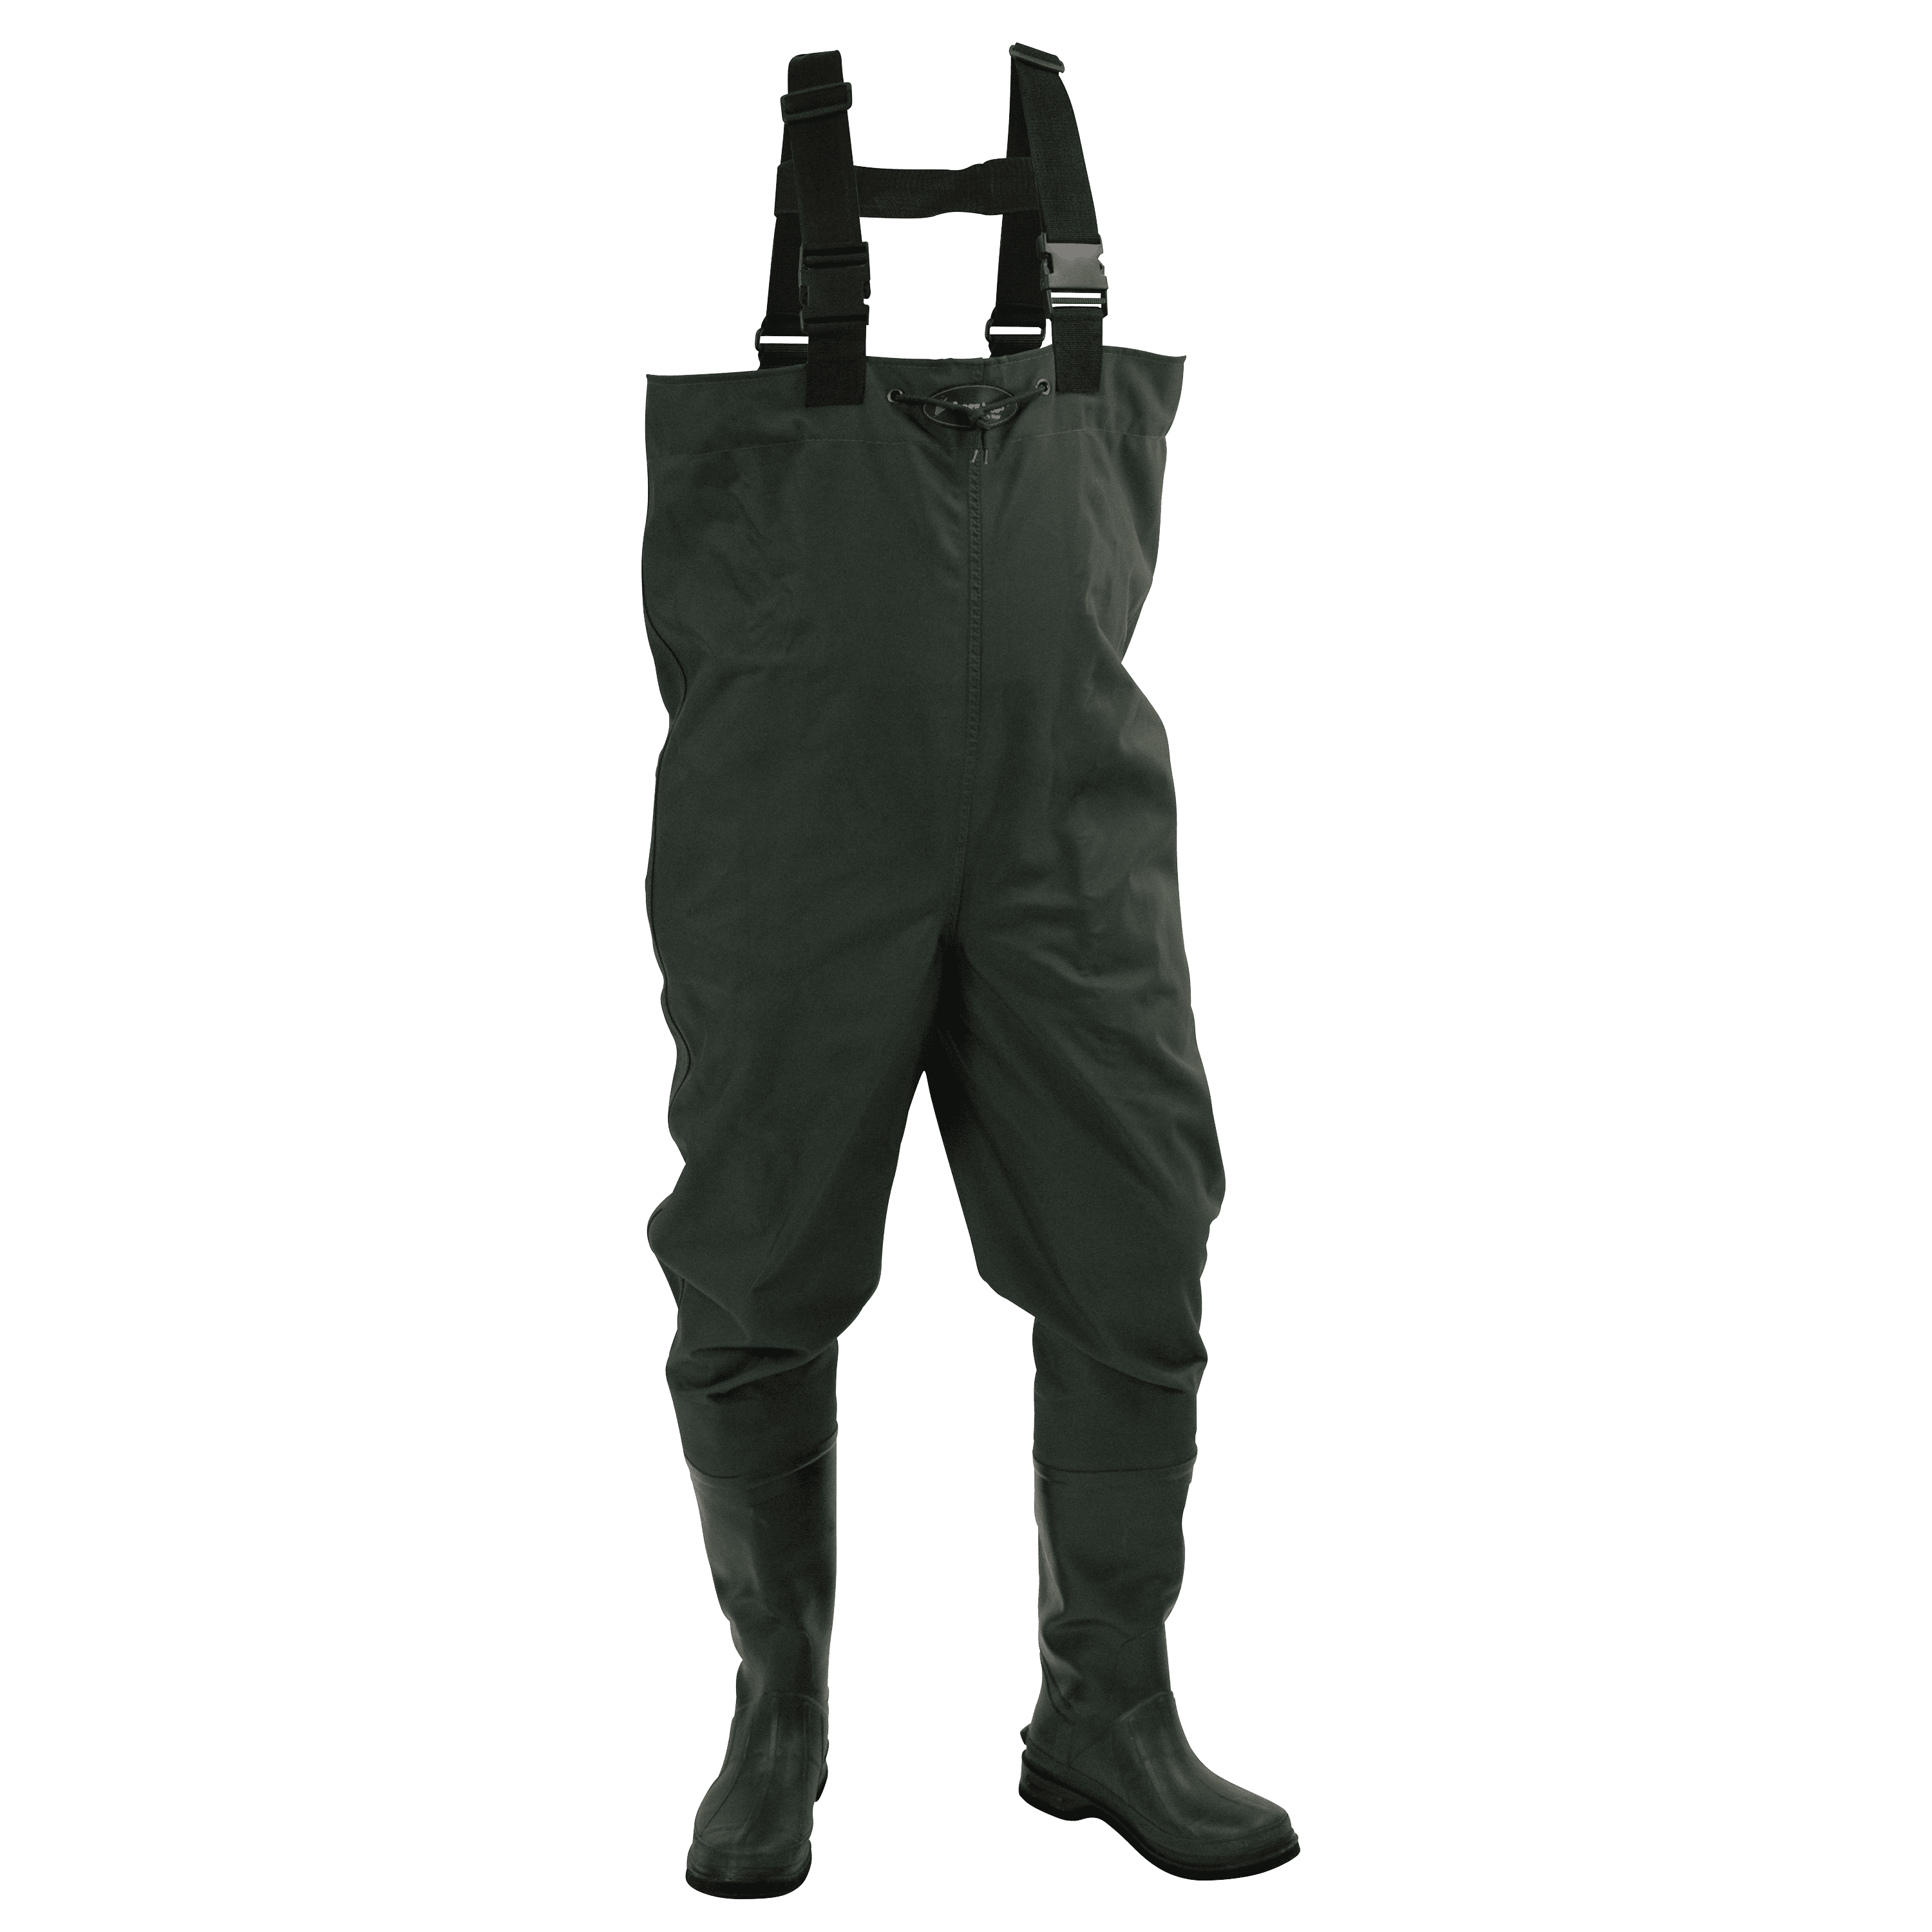 Frogg Toggs Rana II Cleated Chest Waders Realtree Max5 Camo 